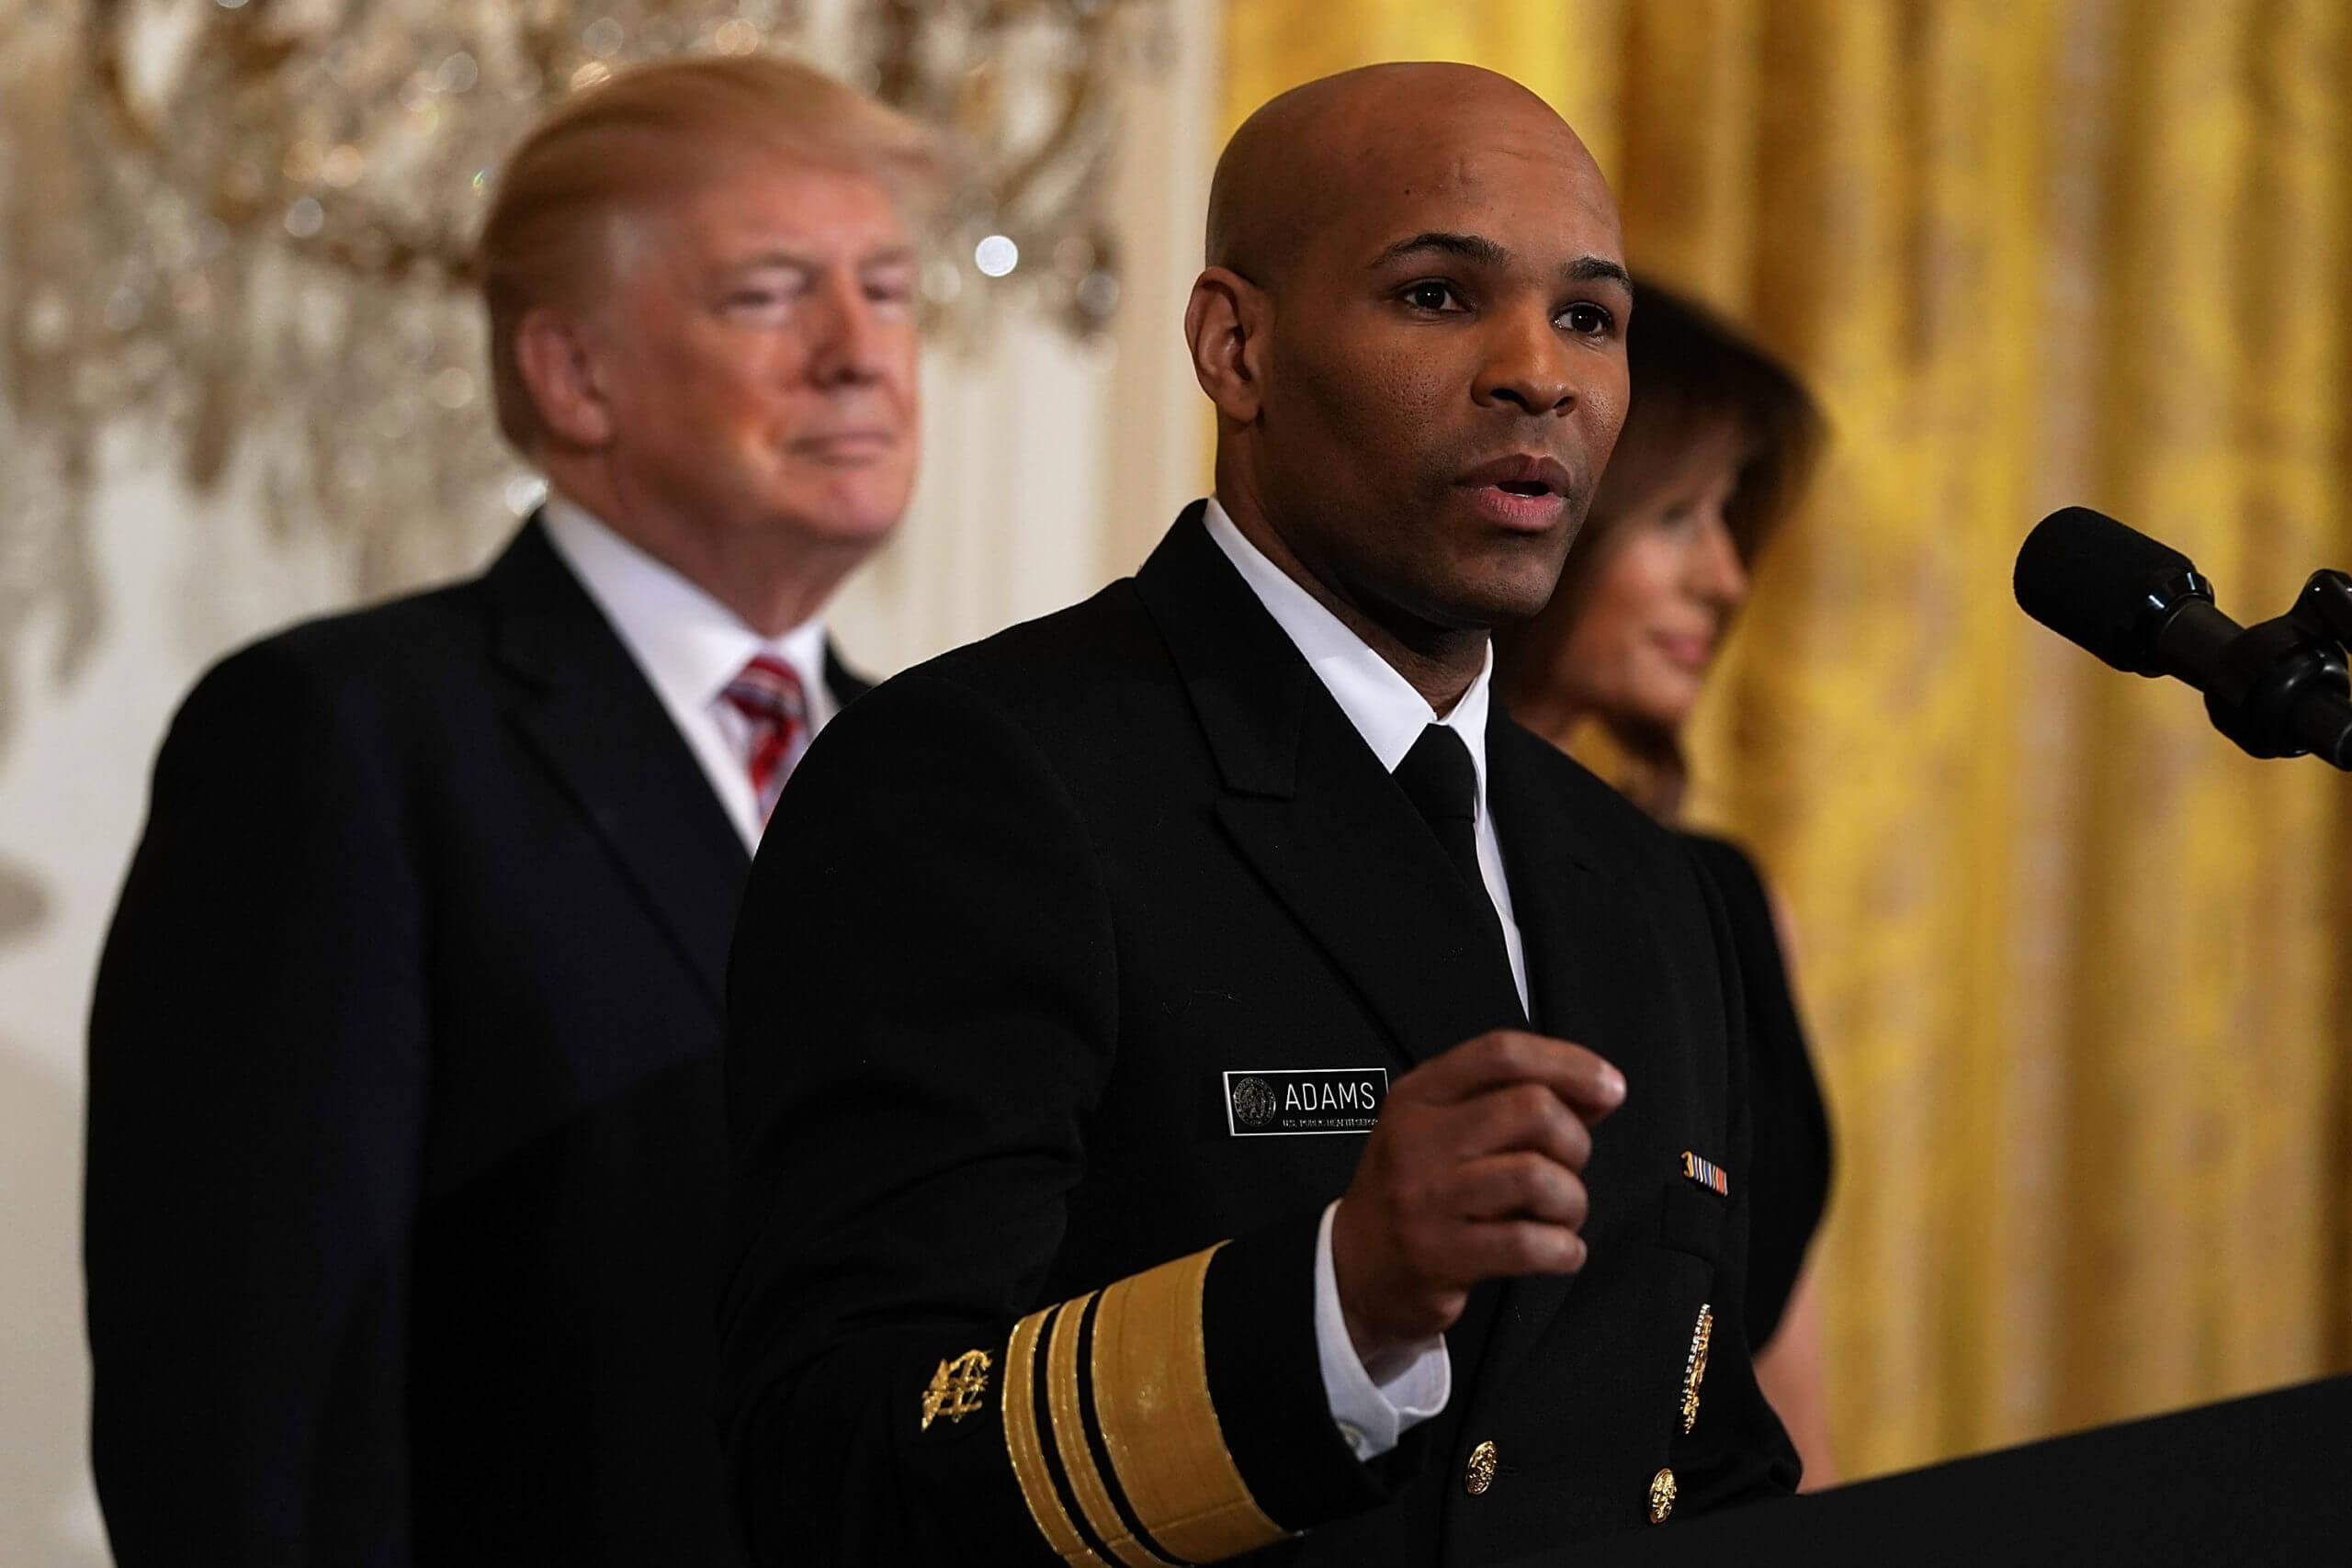 Surgeon General warns: "this will be the hardest week of most Americans lives"